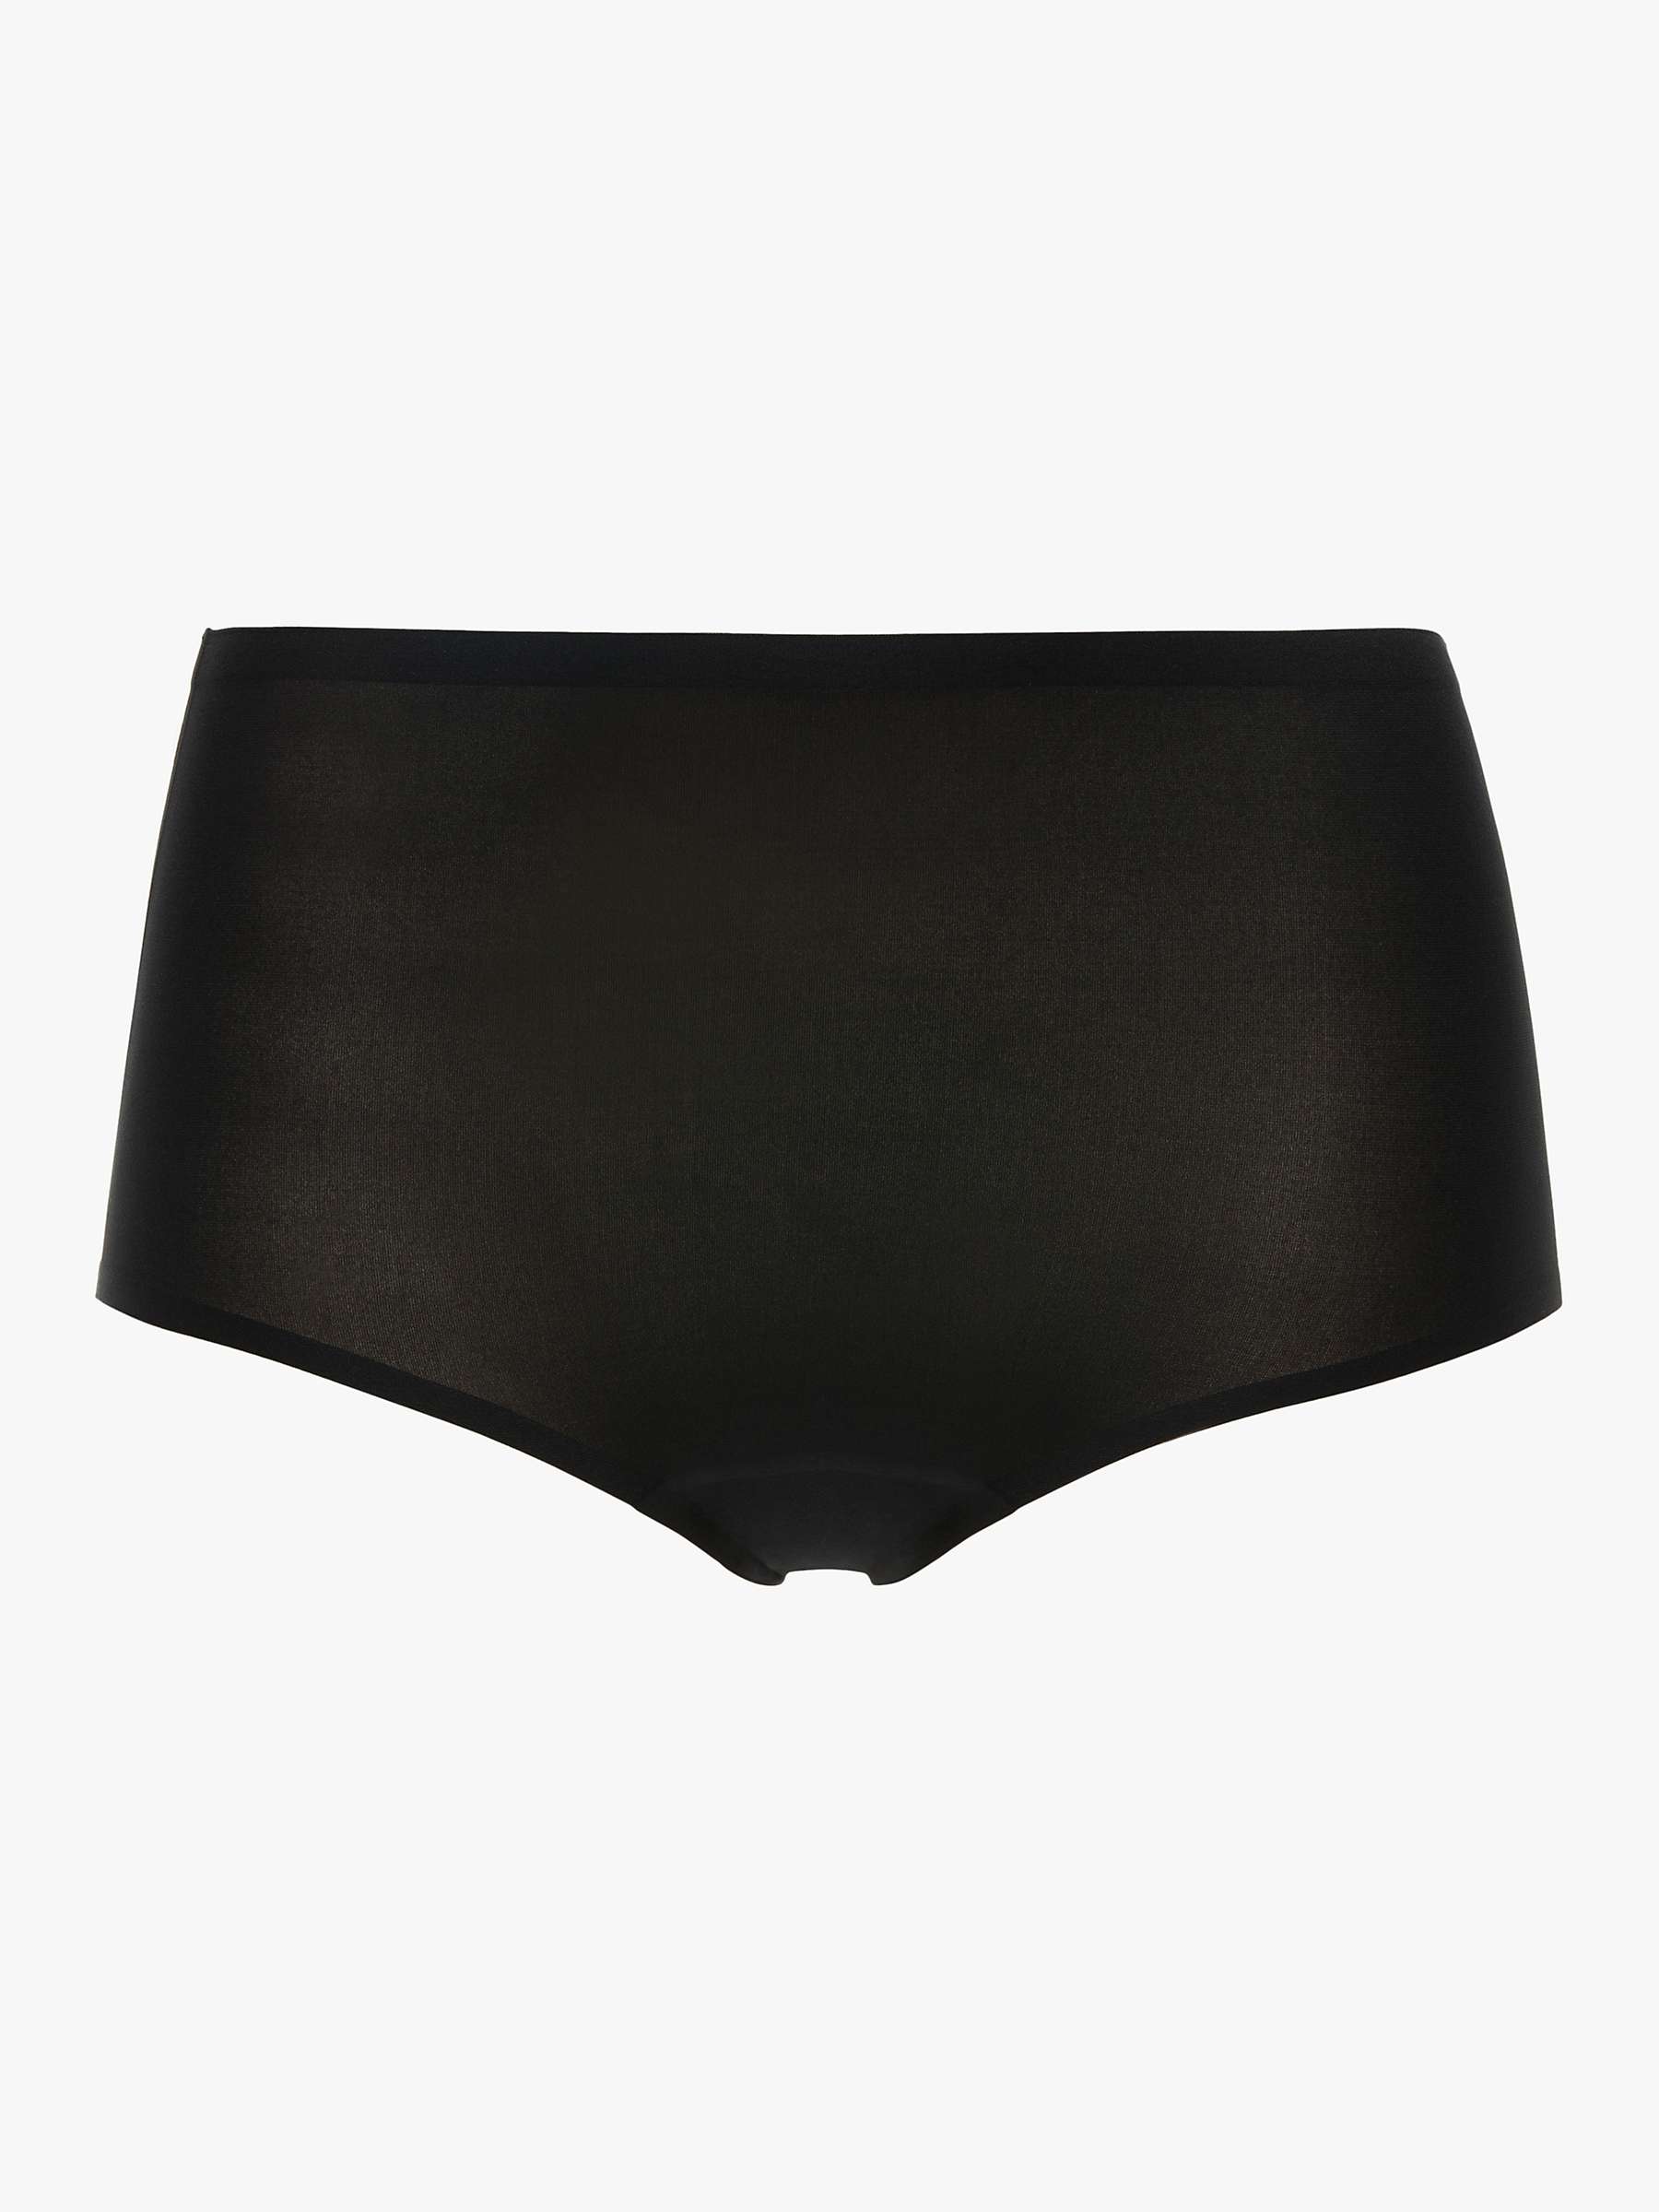 Buy Chantelle Soft Stretch High Waist Knickers, Pack of 3 Online at johnlewis.com